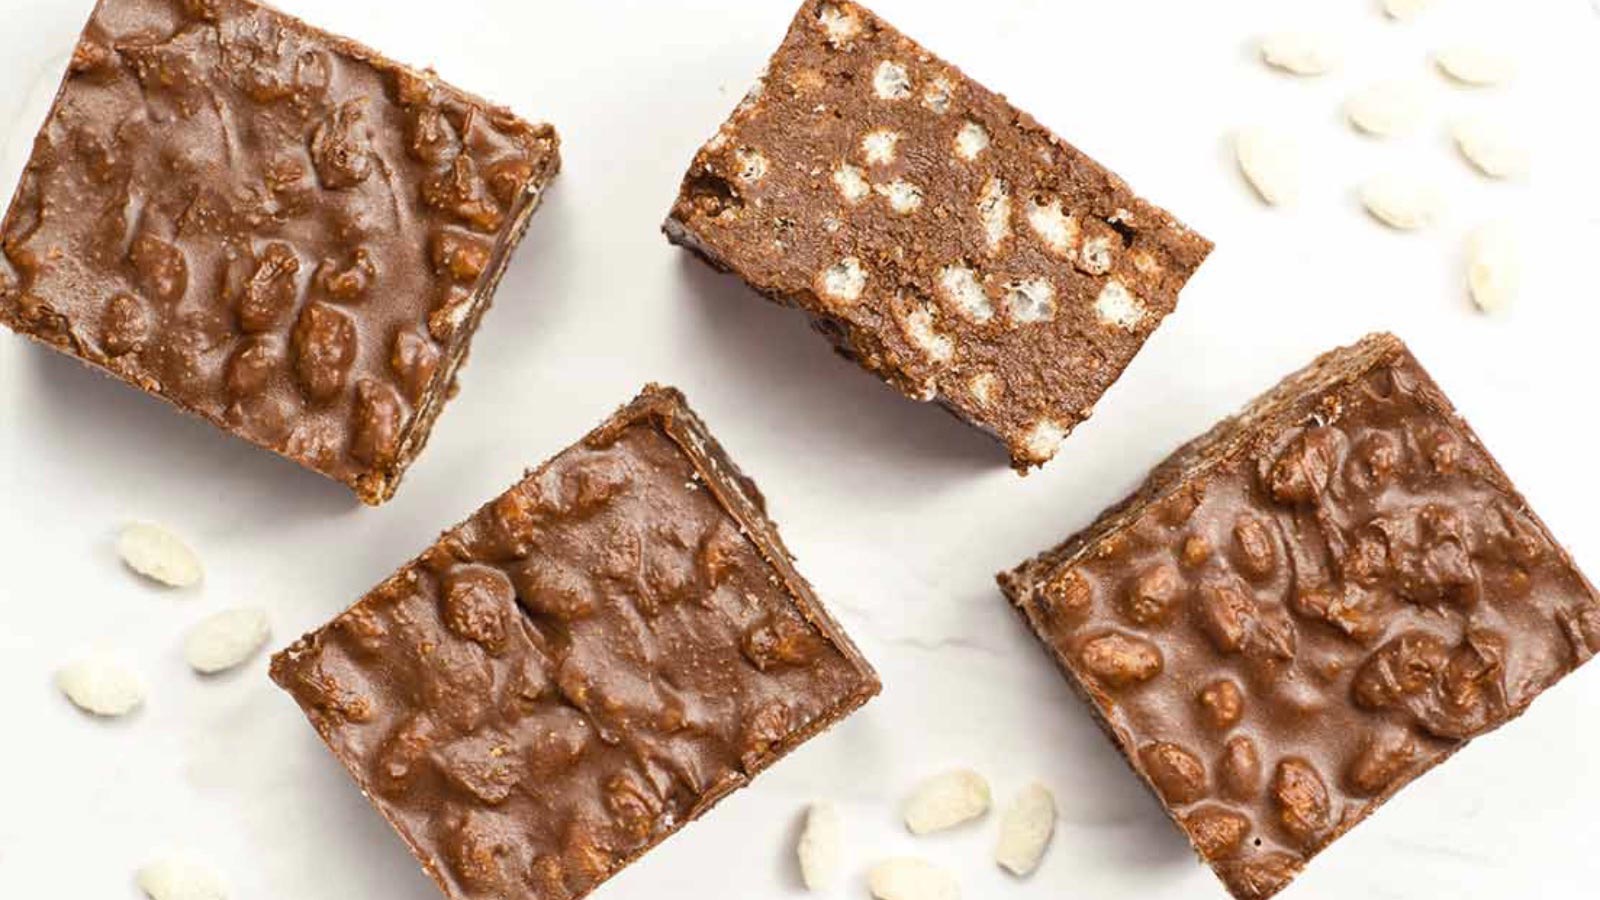 Four Homemade Crunch Bars laying on a white surface.